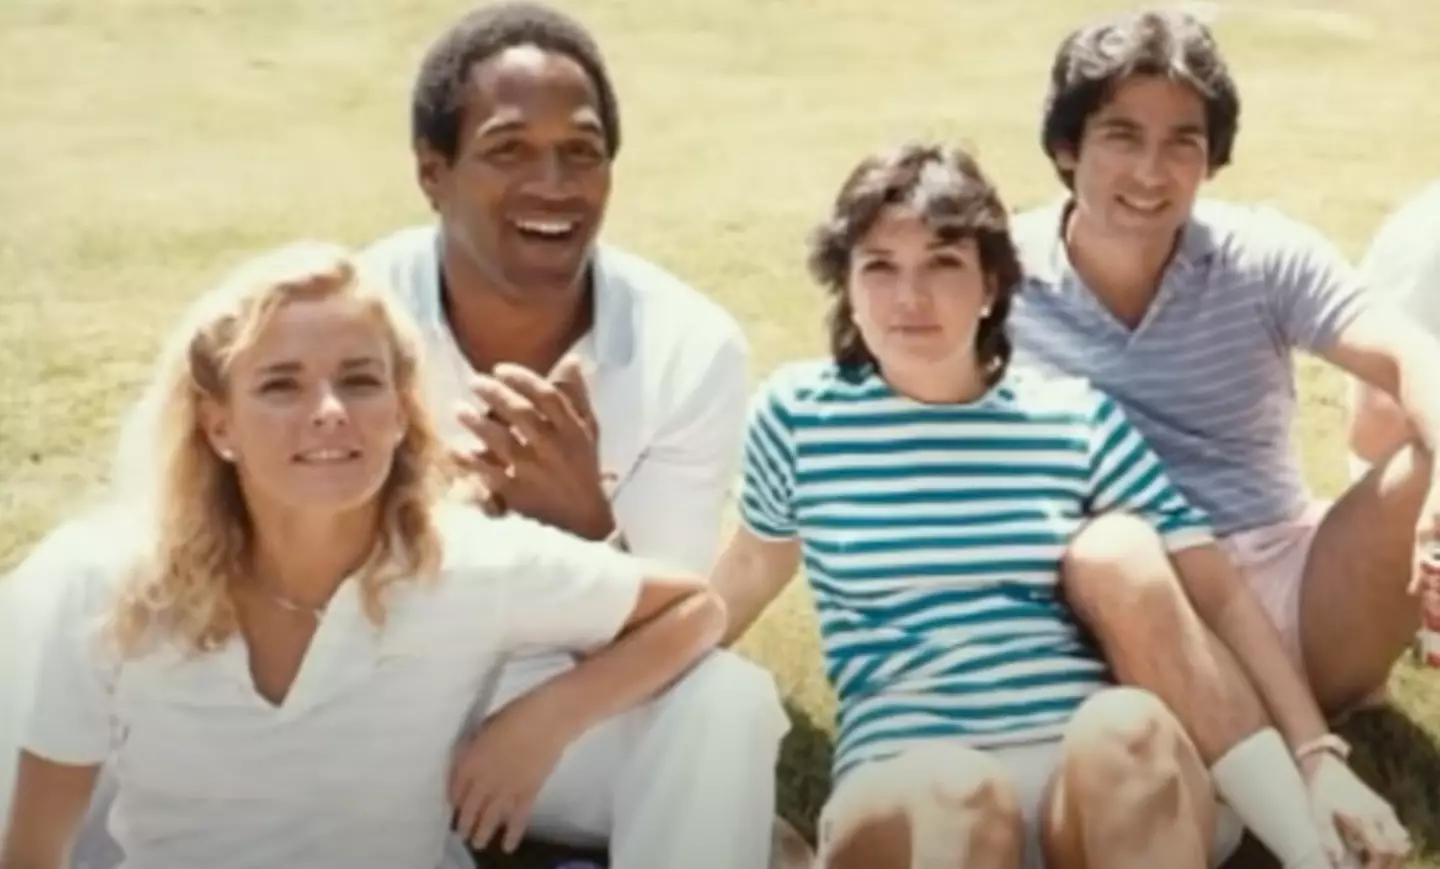 Kris and Robert with celebrity friends OJ Simpson and Nicole Brown Simpson.